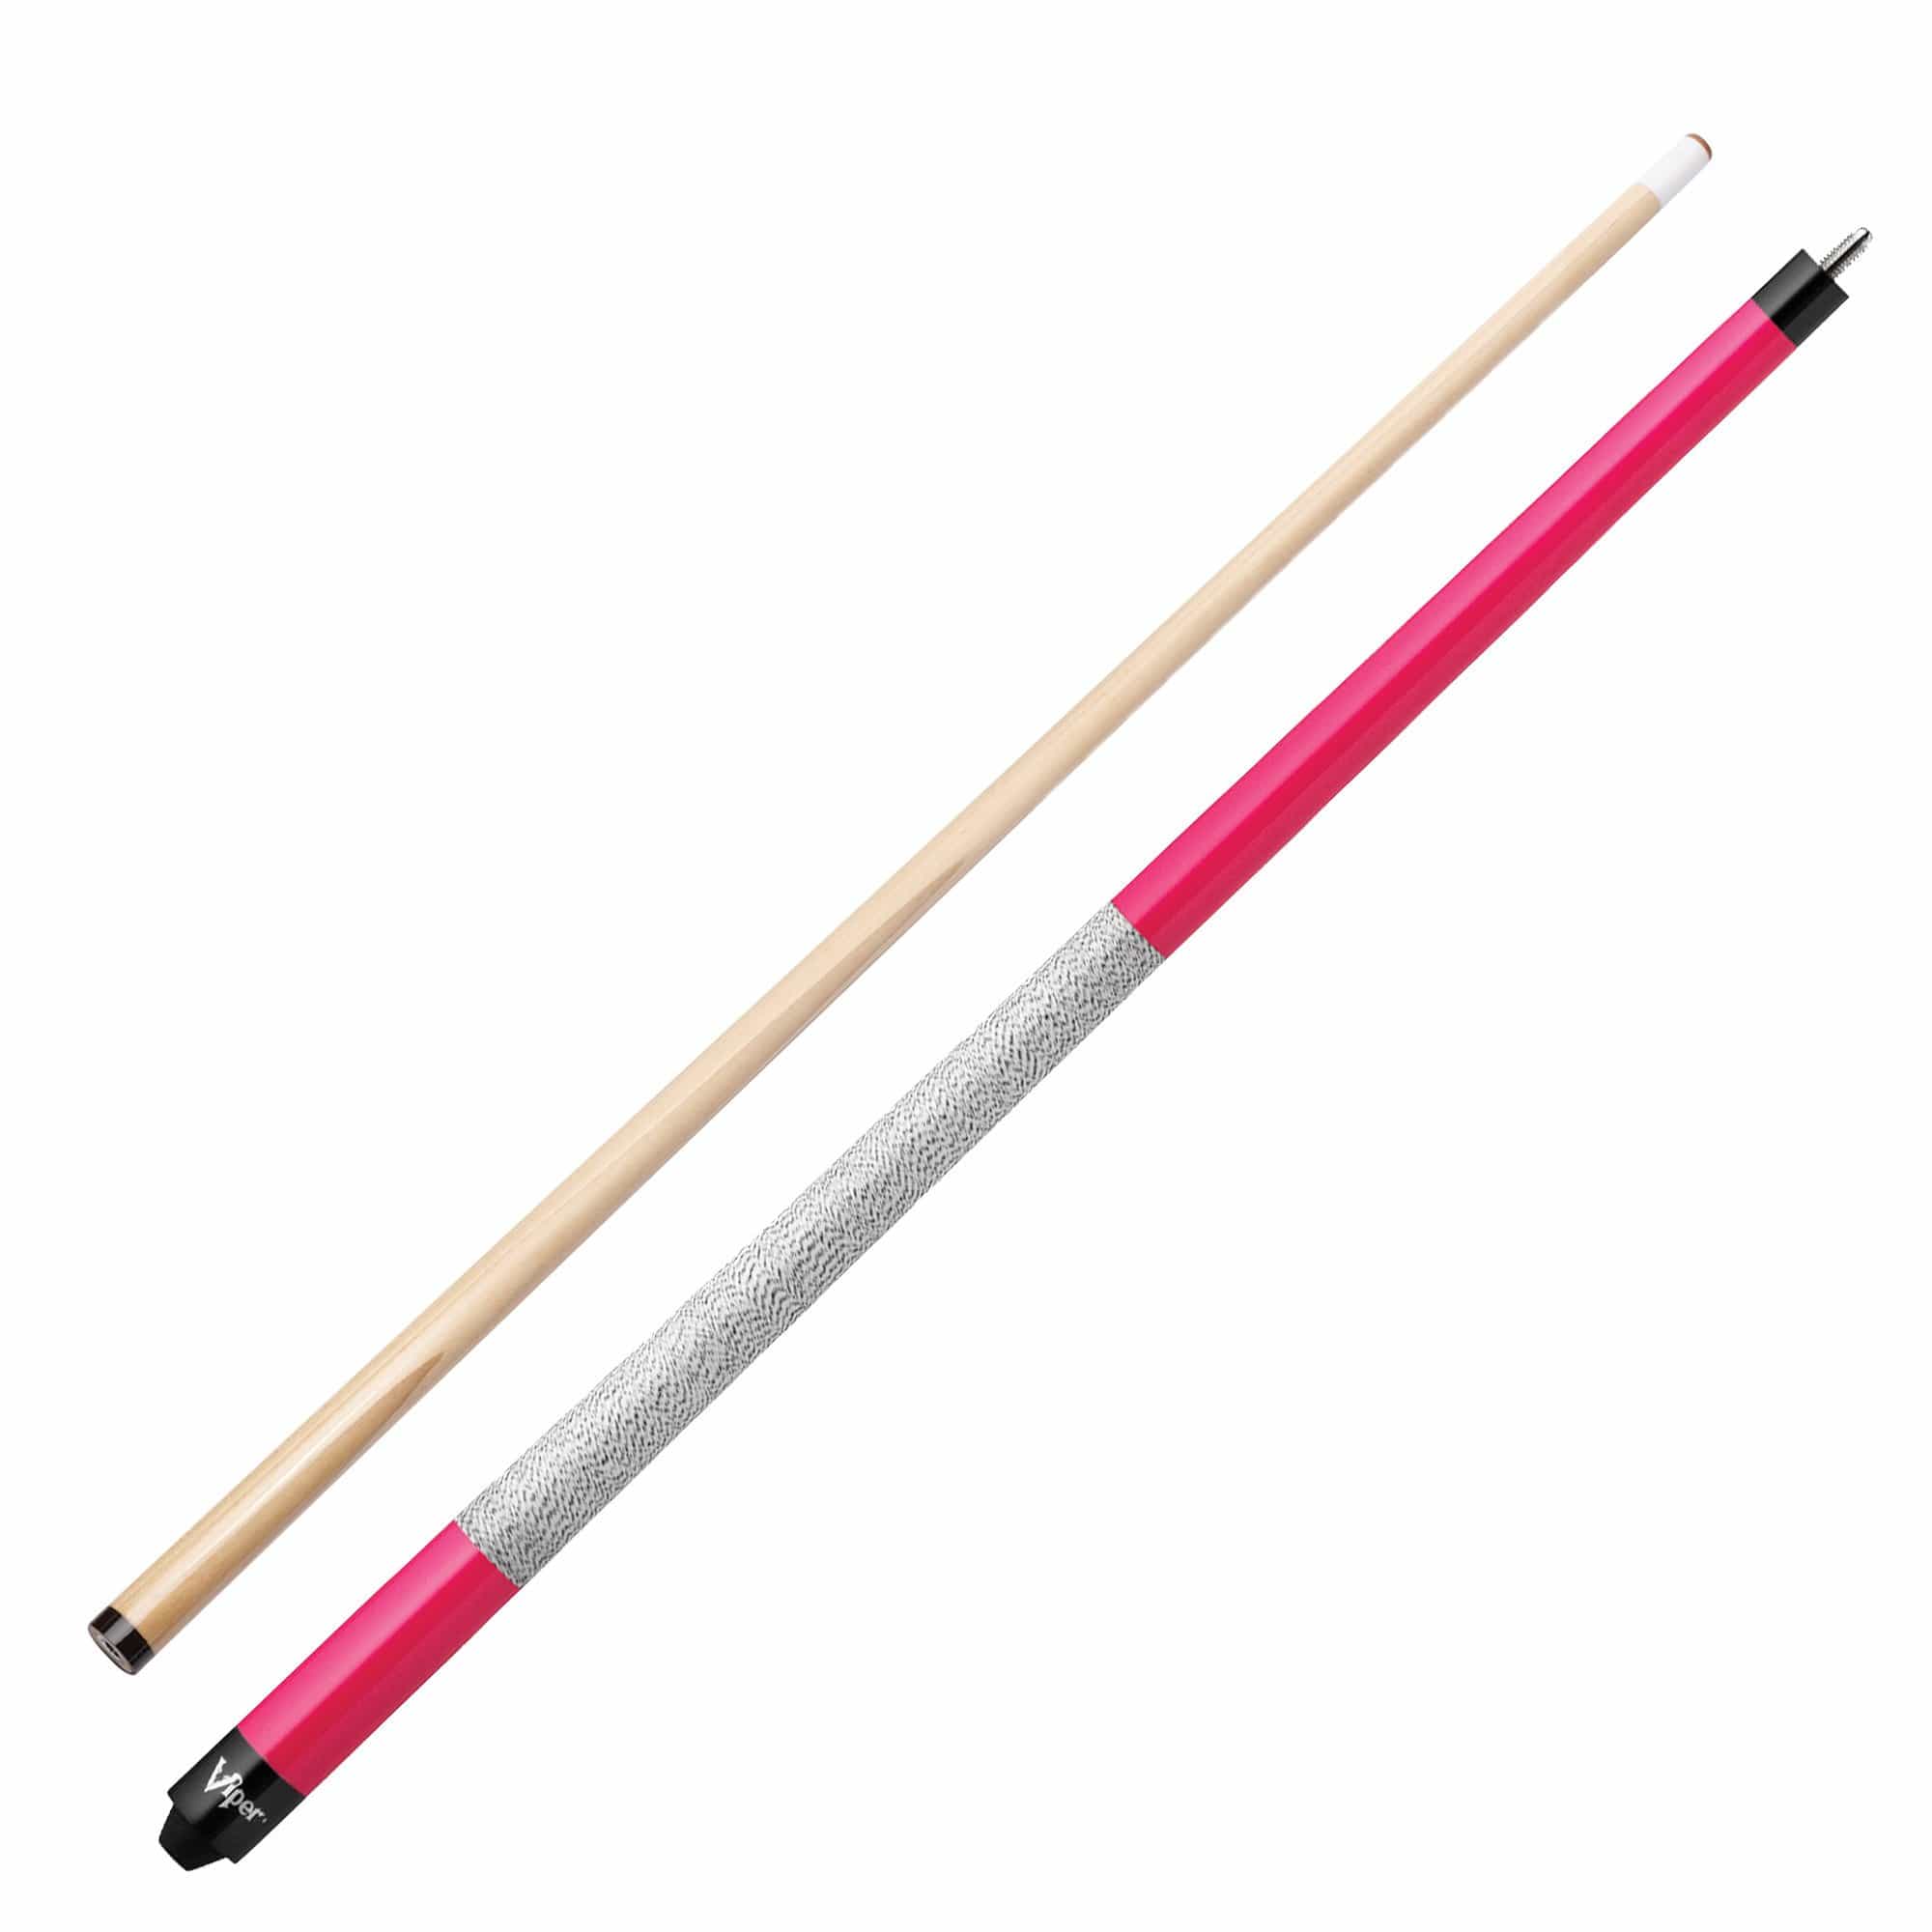 Viper Billiards Pink / Maple Wood Viper Elite Series Hot Pink Wrapped Cue